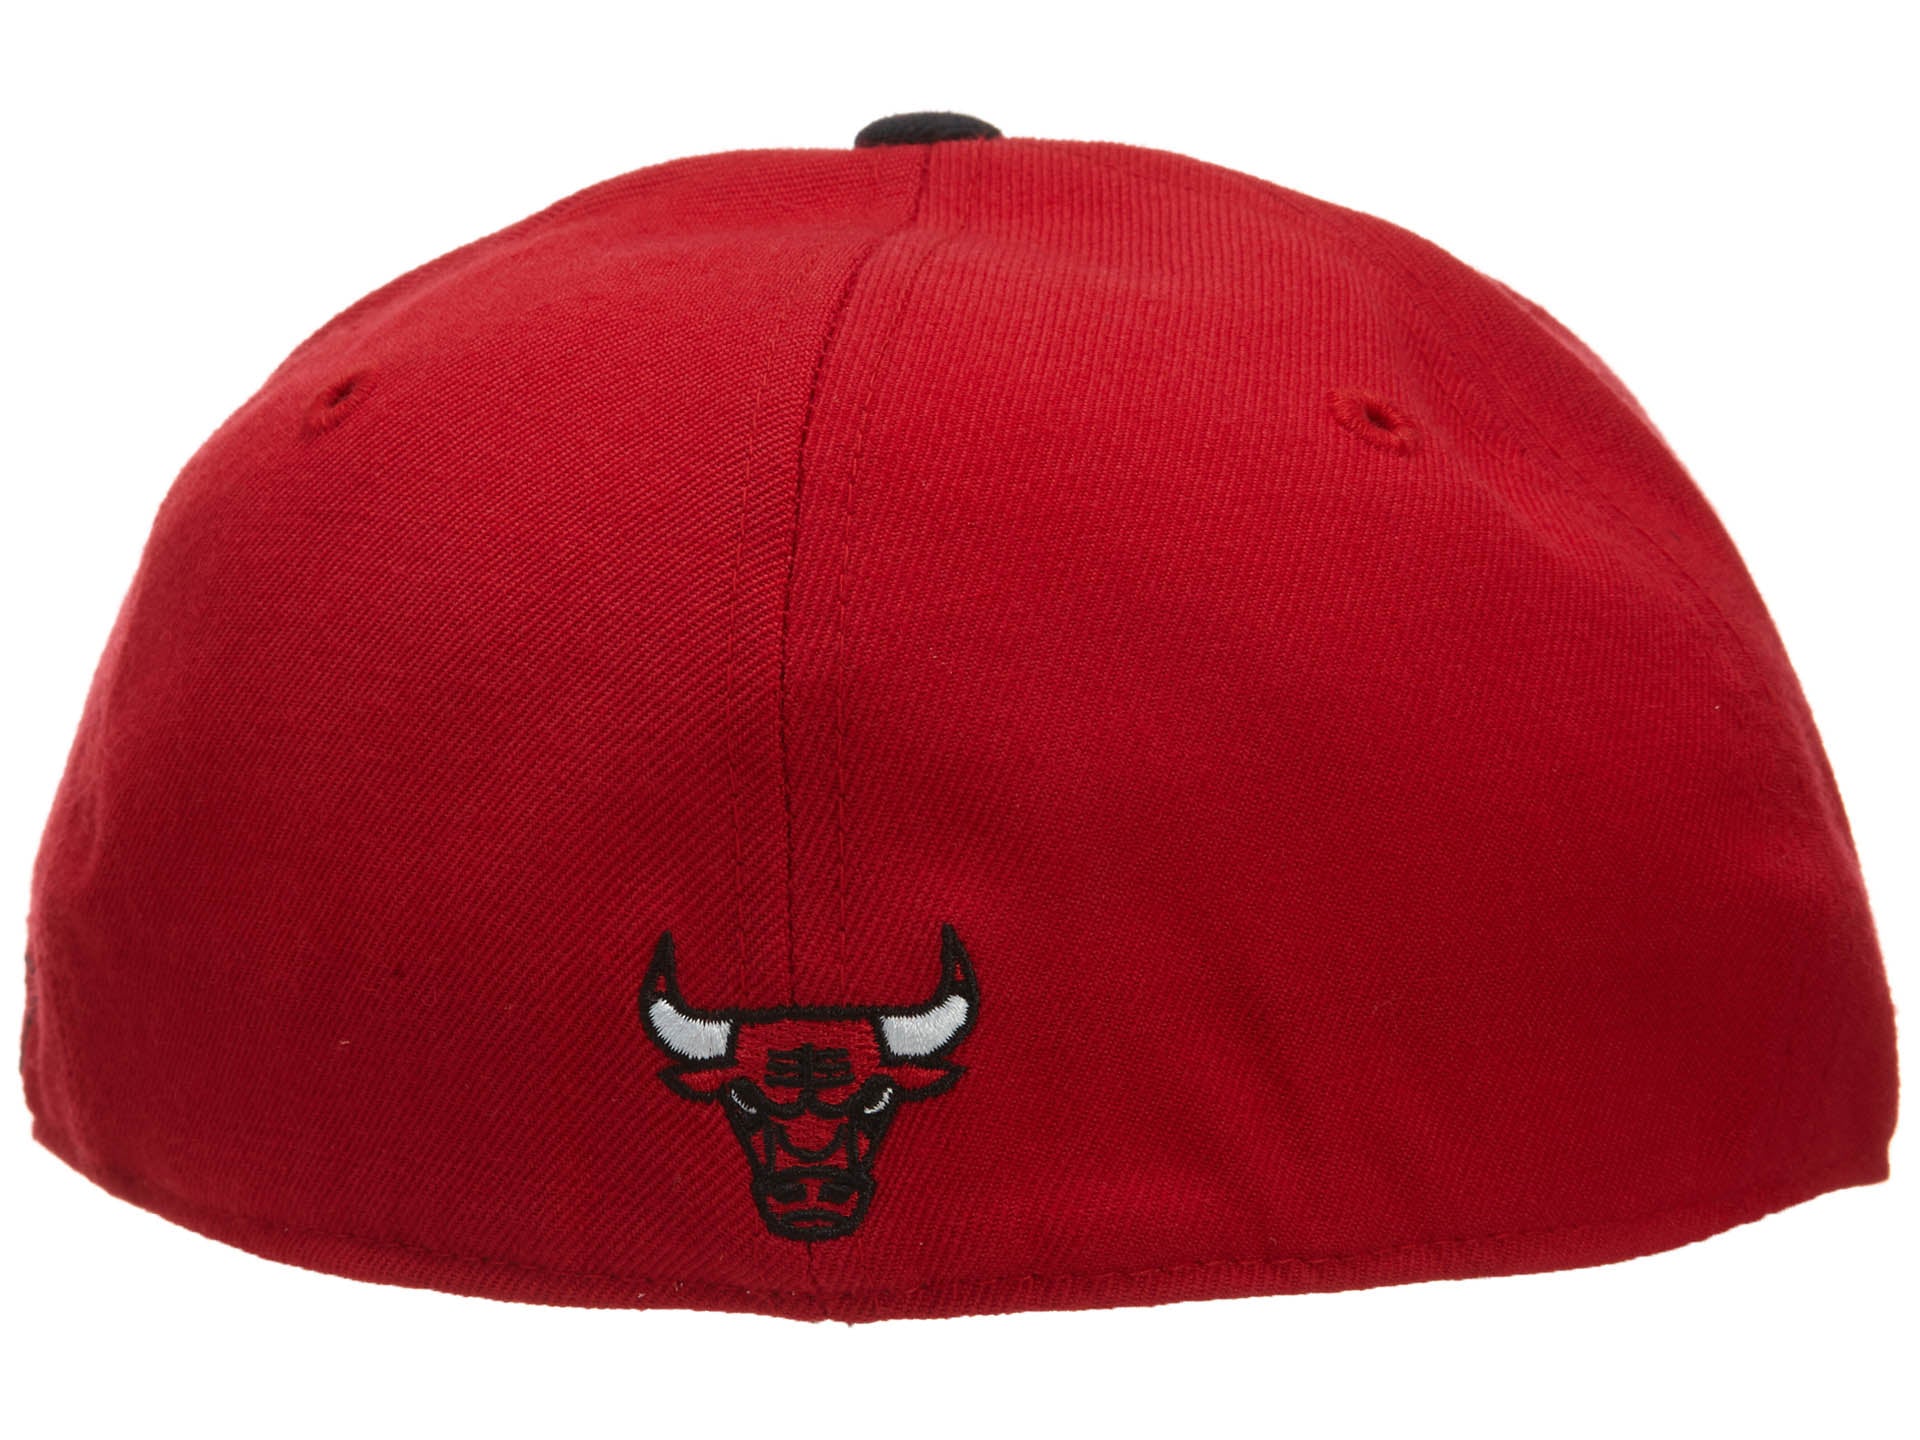 Reebok Chicago Bulls Fitted Hat Mens Style : Hat176